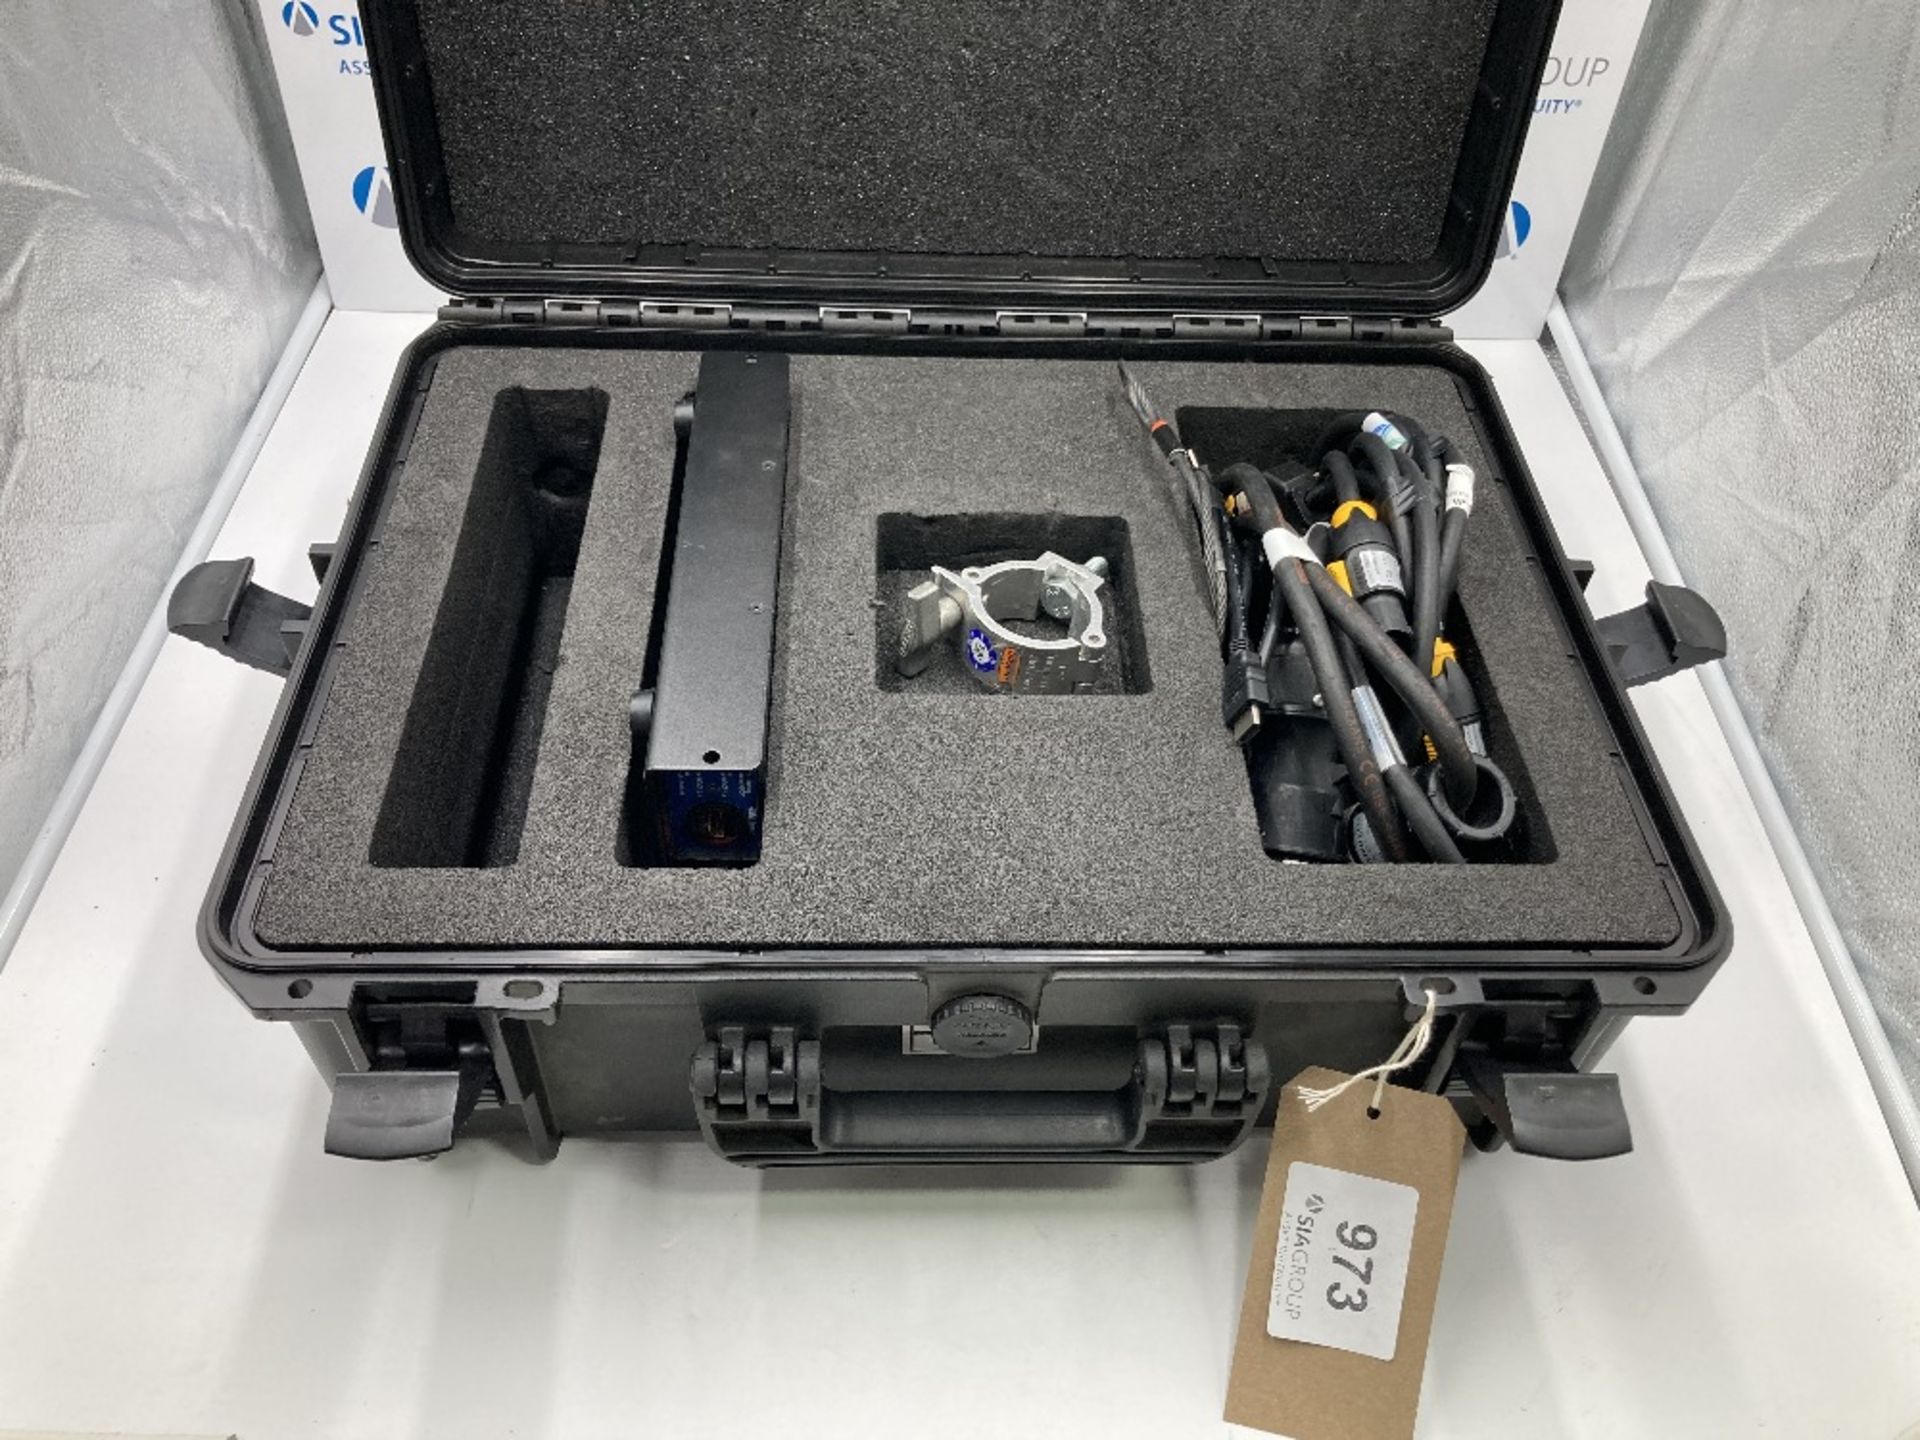 Connex CMx2 HI1 HDMI Fibre TX With 13amp True 1 Powercon Cable And Carry Case - Image 2 of 9